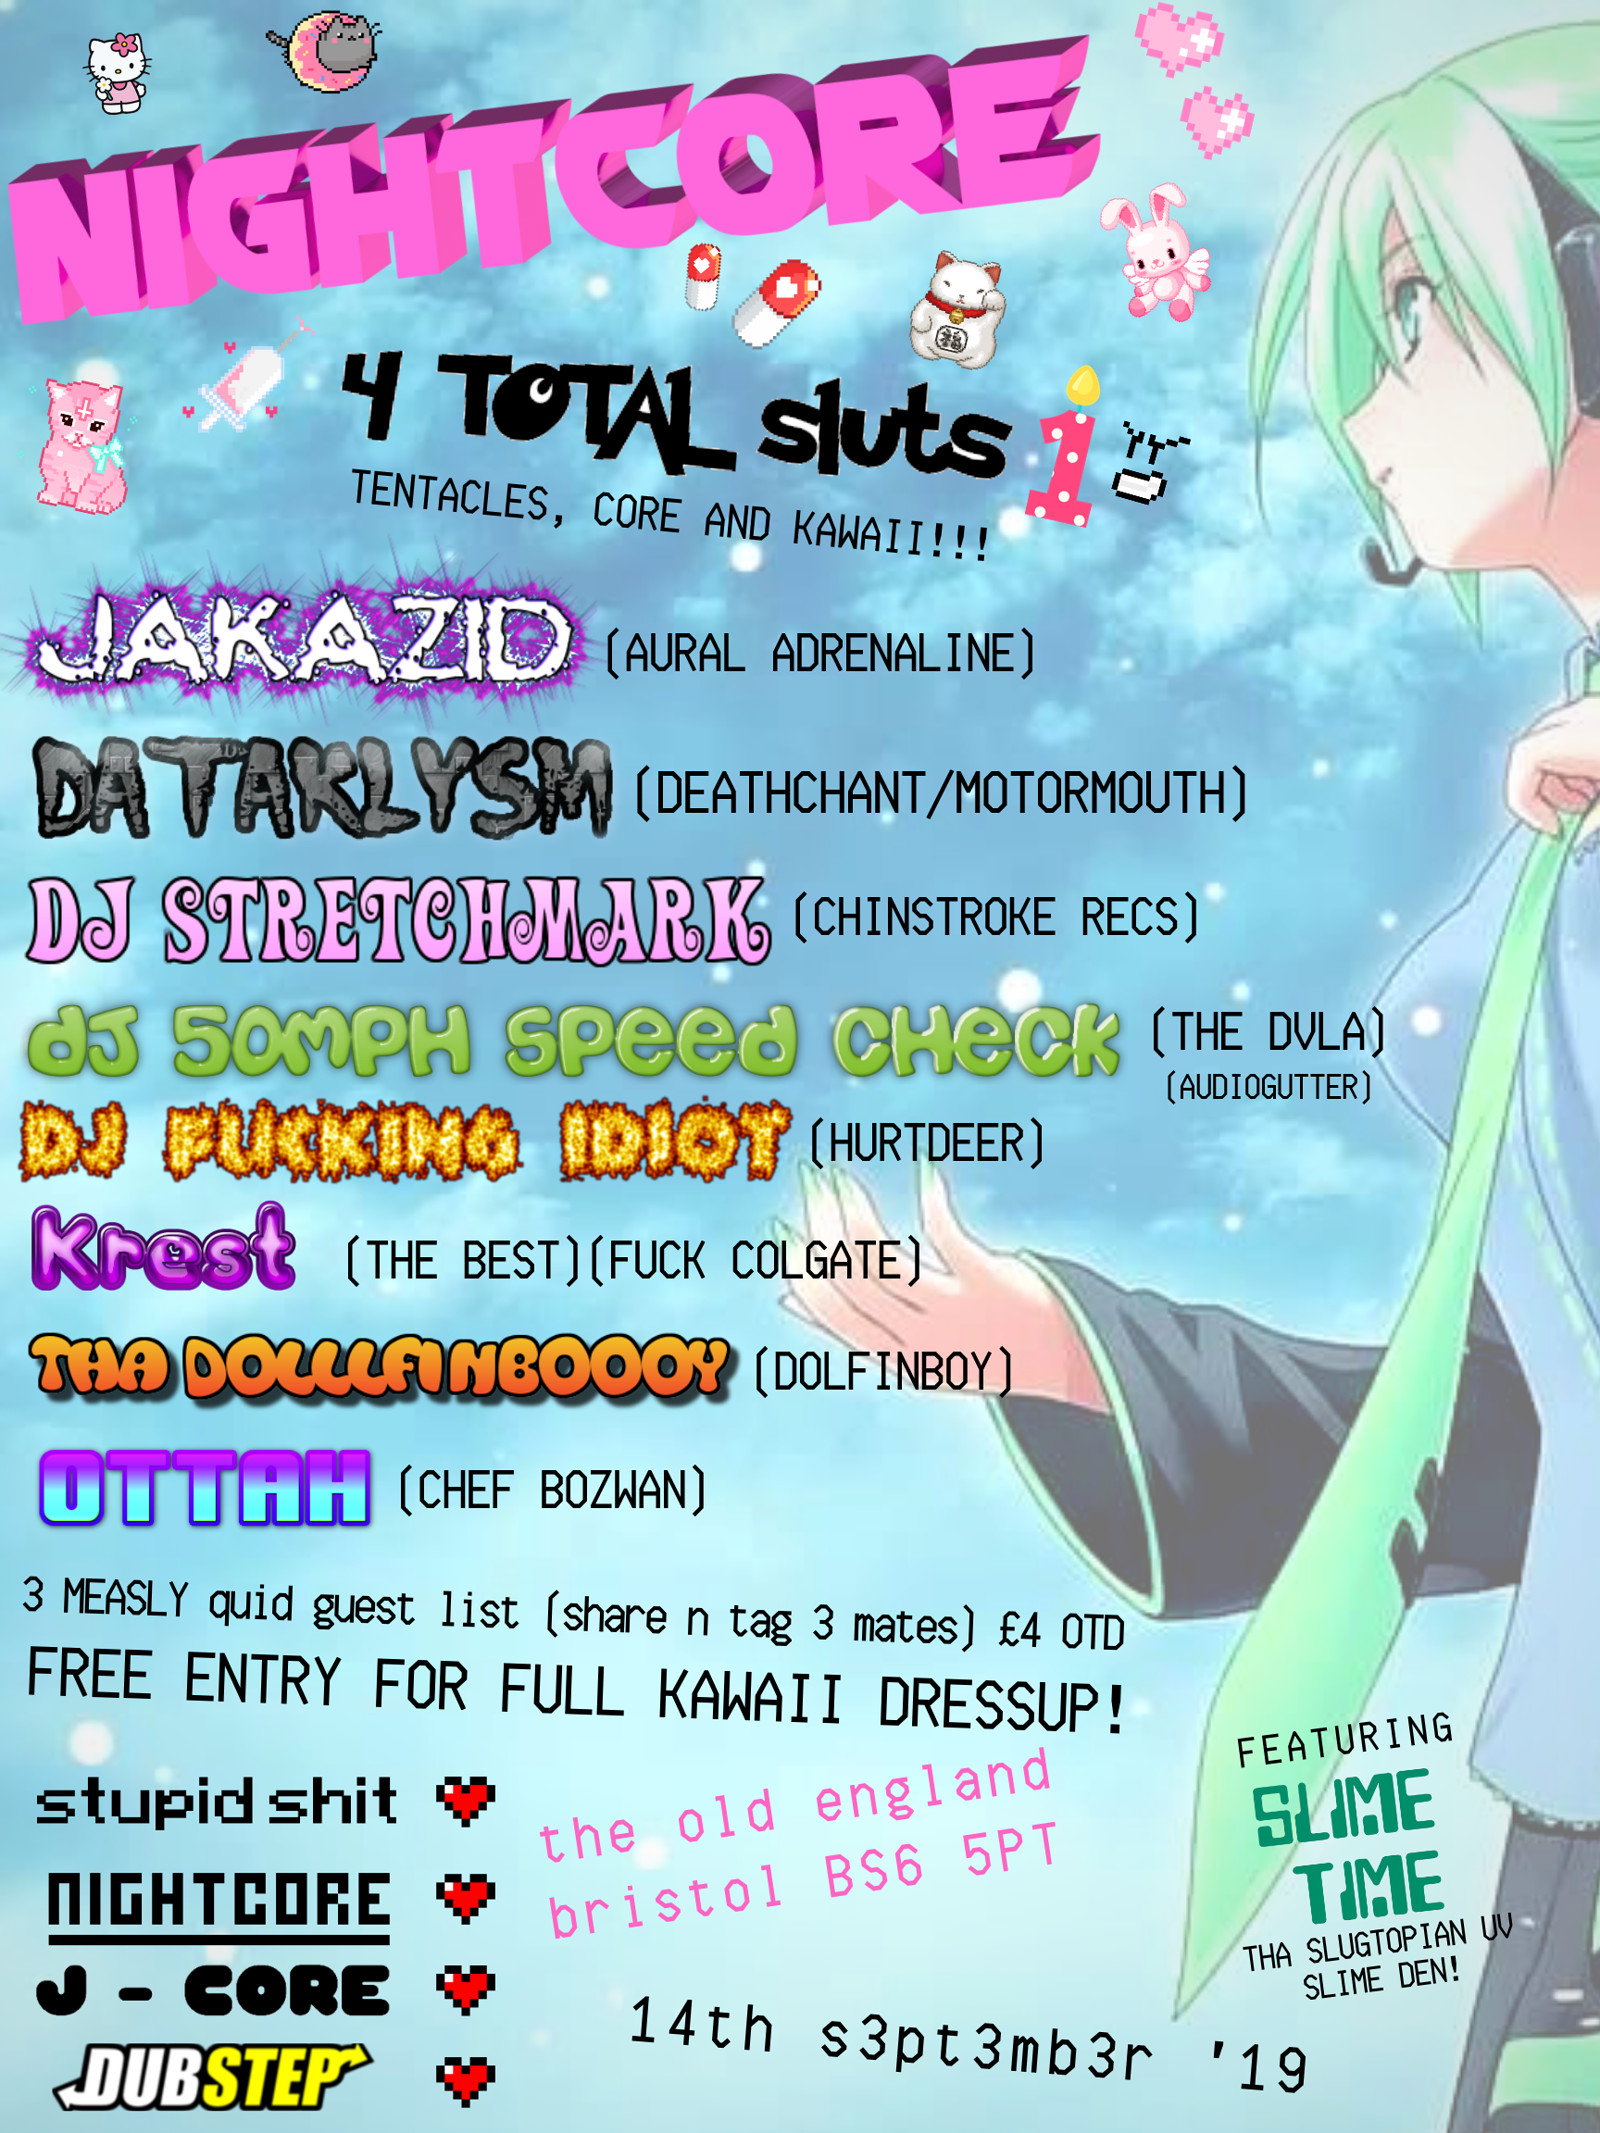 Nightcore For Total Sl*ts at The Old England Pub